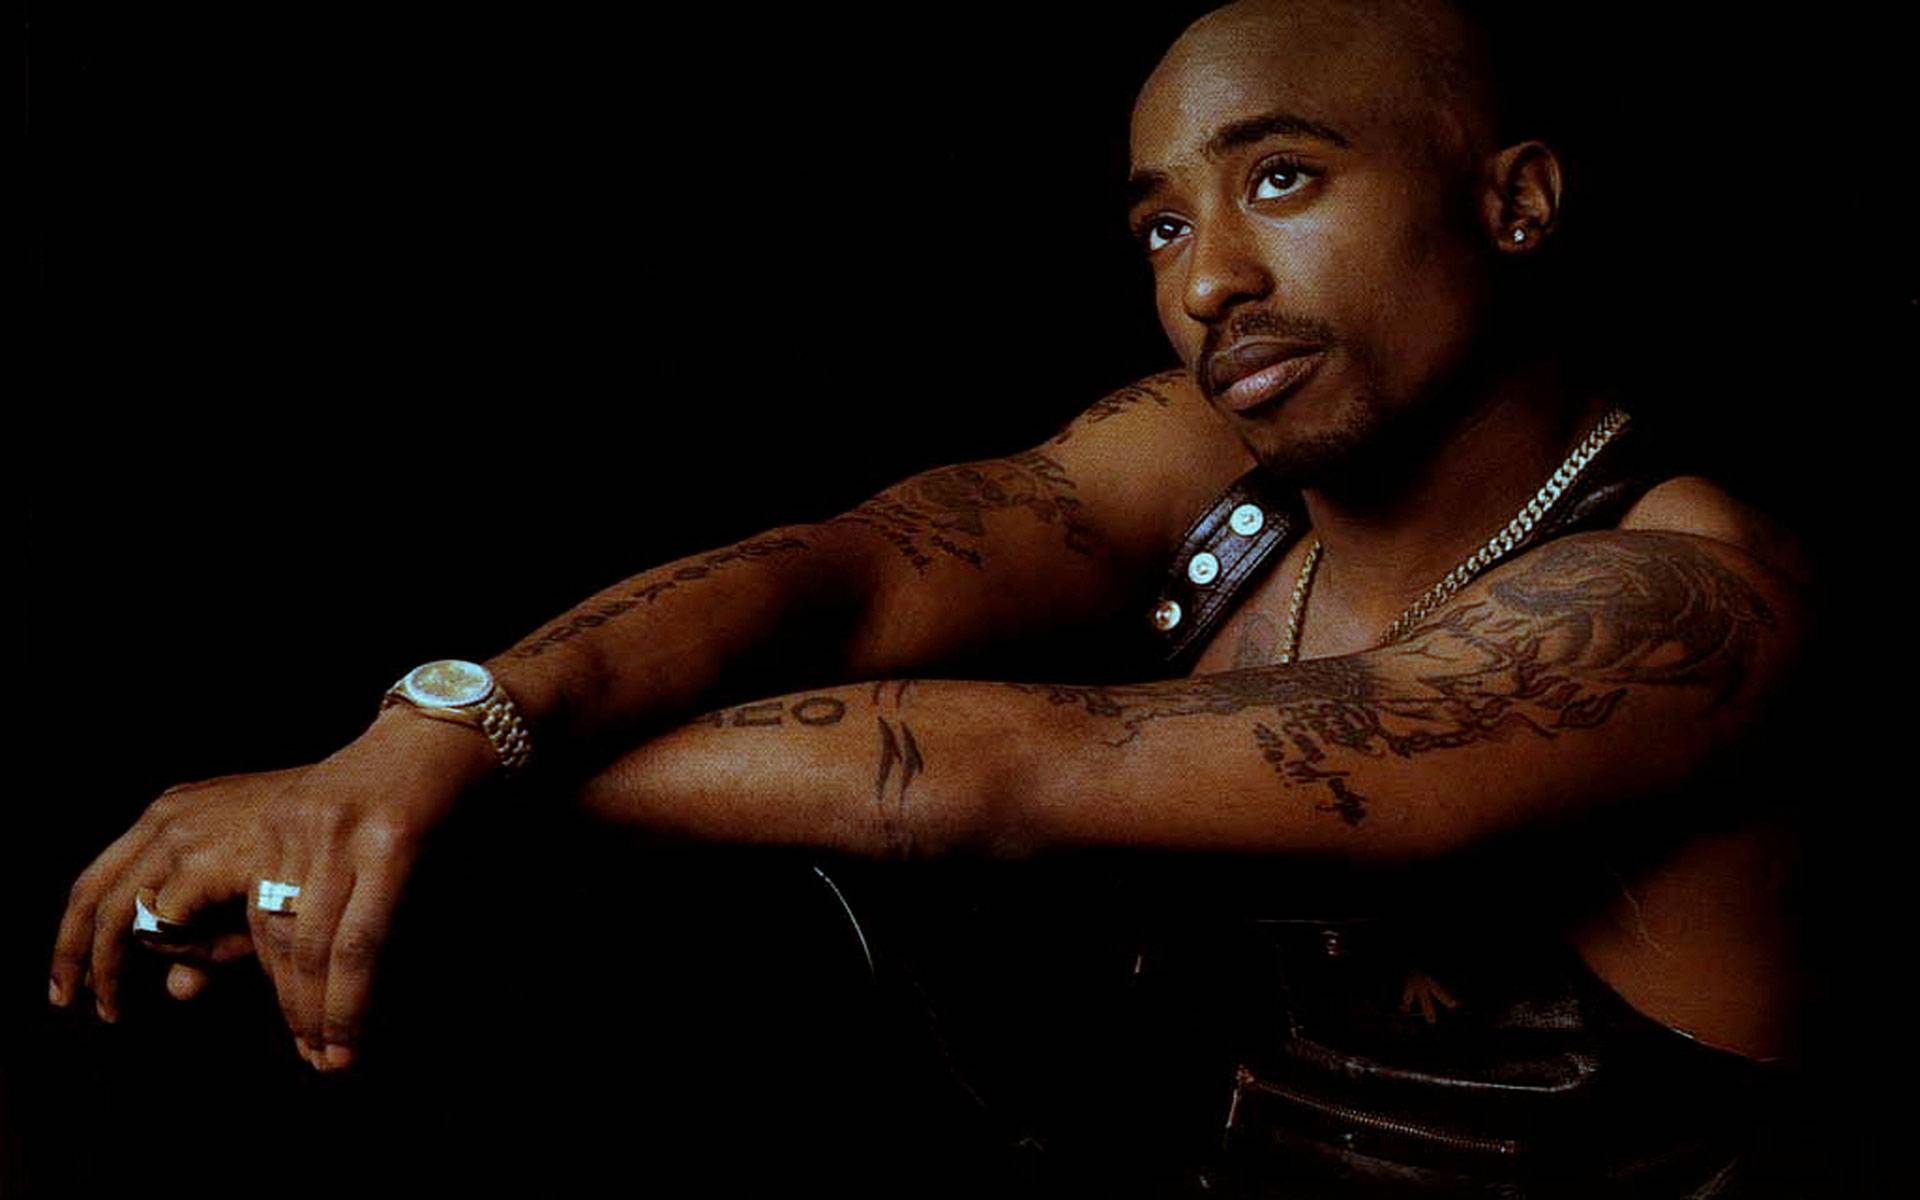 2Pac Shakur All Eyes On Me Picture Wallpaper   2pac Wallpaper